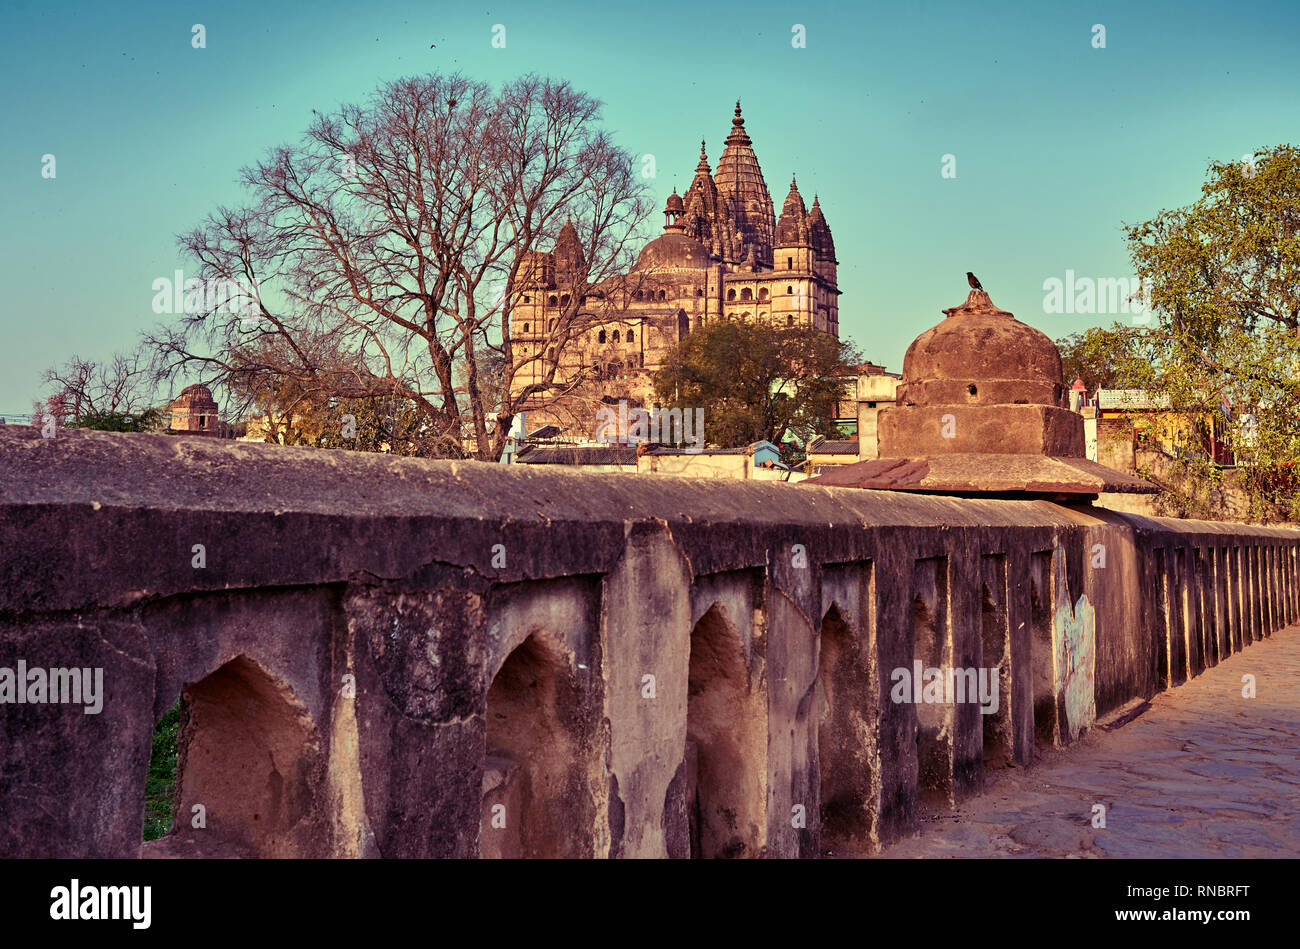 Jahangir Mahal, Citadel of Jahangir, Orchha Palace, Citadel. Jahangir Mahal is a citadel and garrison located in Orchha, in the Tikamgarh district of  Stock Photo